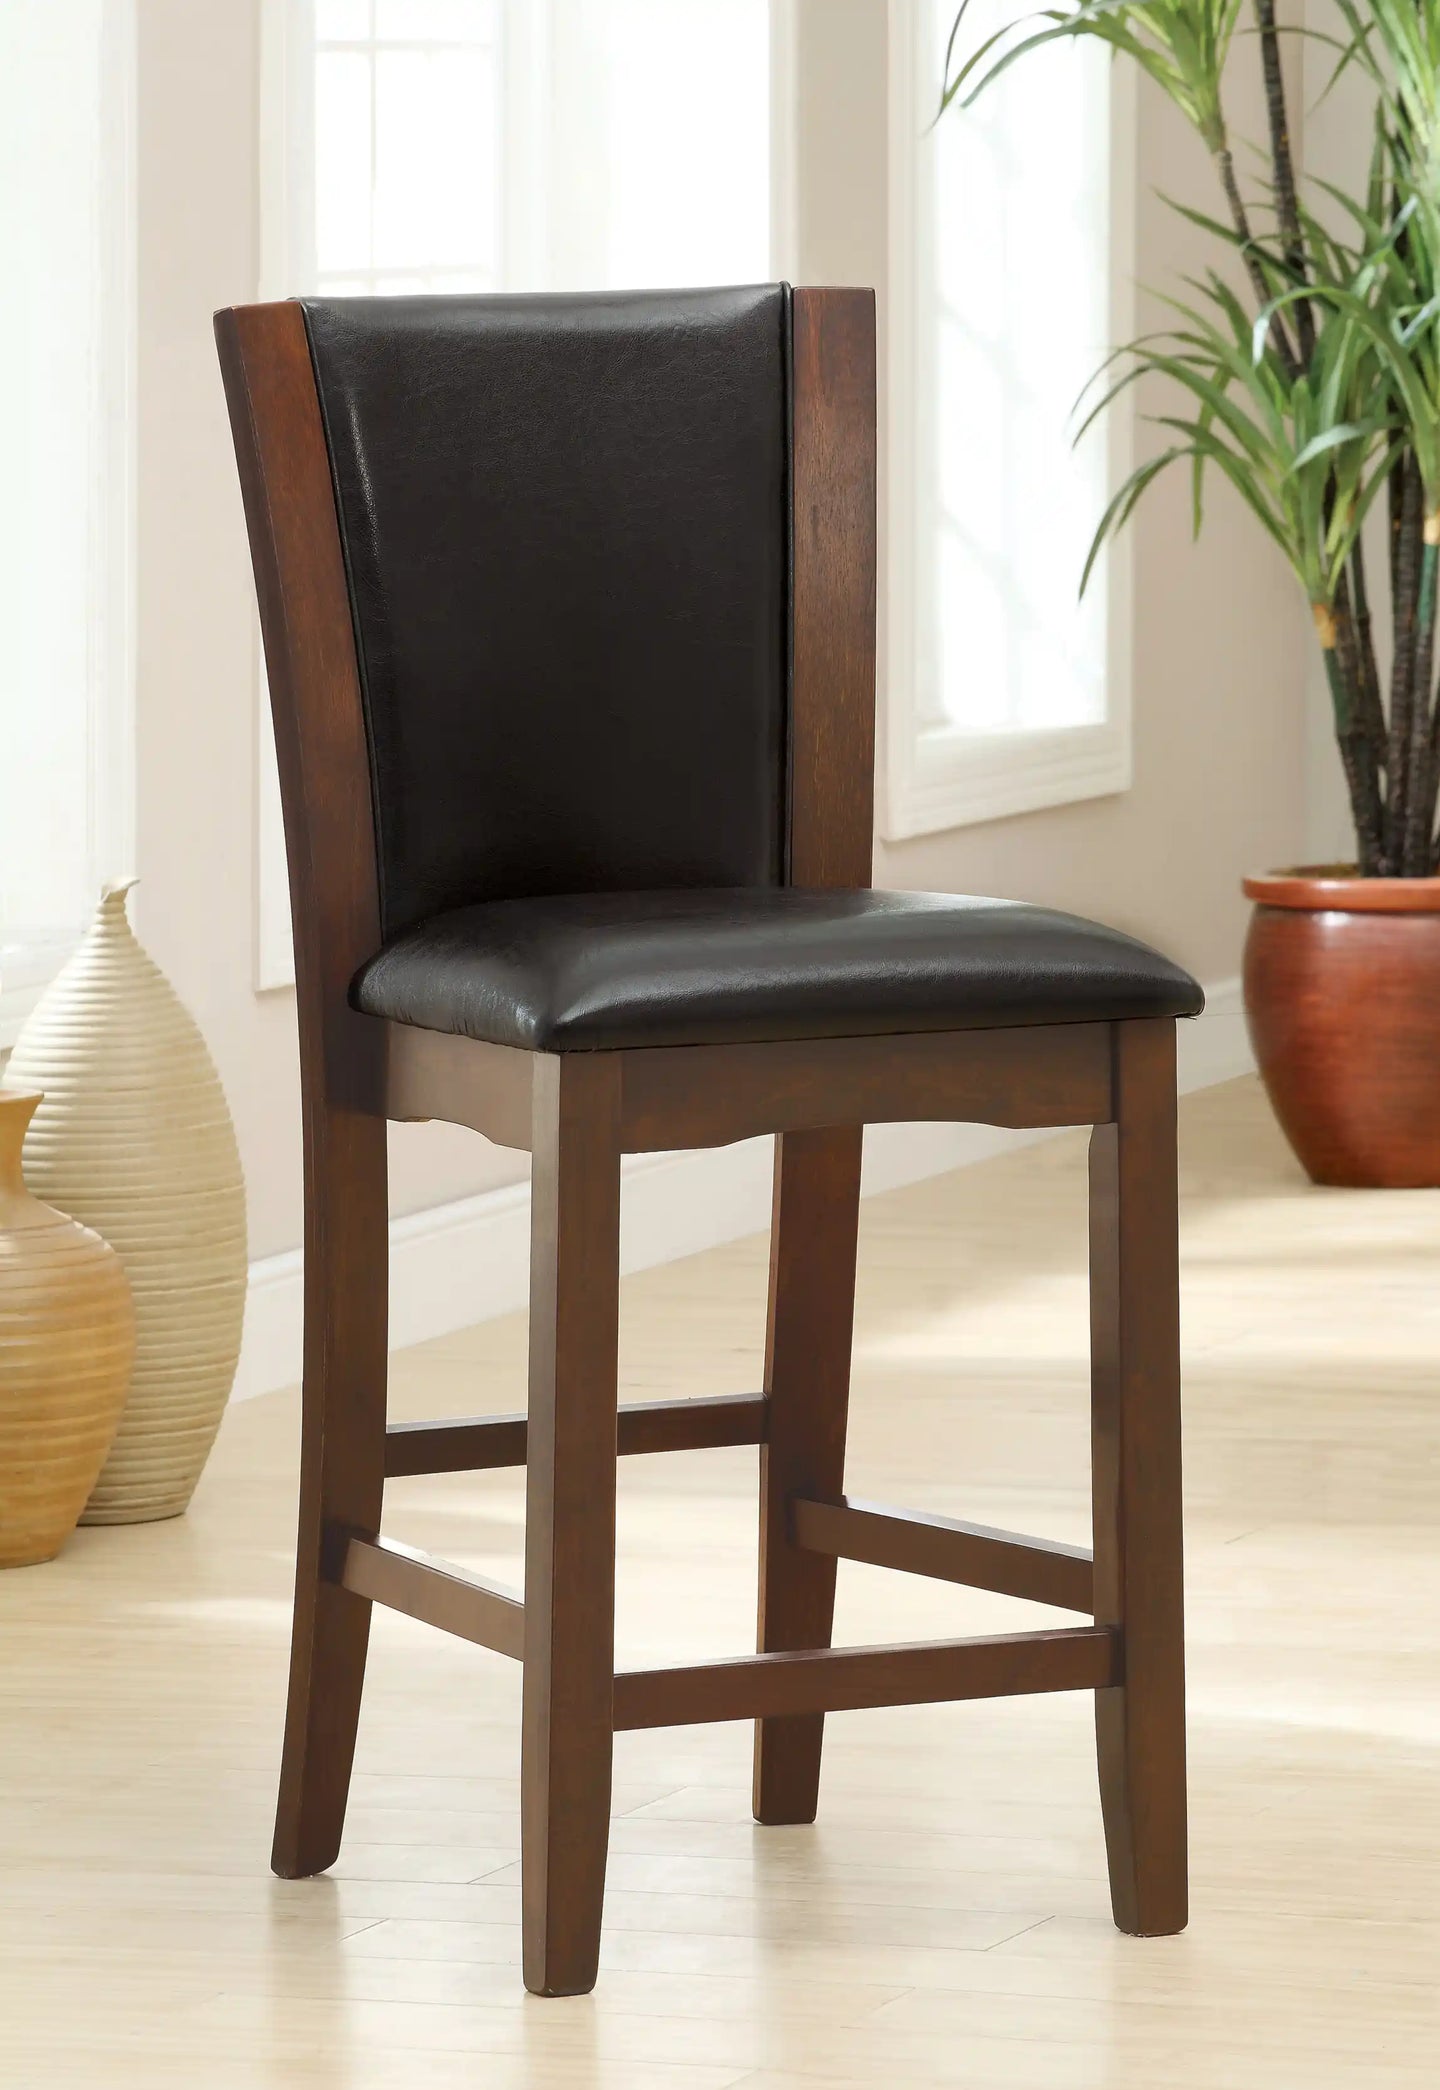 Furniture of America Aloise Contemporary Padded Counter Height Chairs in Brown Cherry and Black (Set of 2) - IDF-3710PC